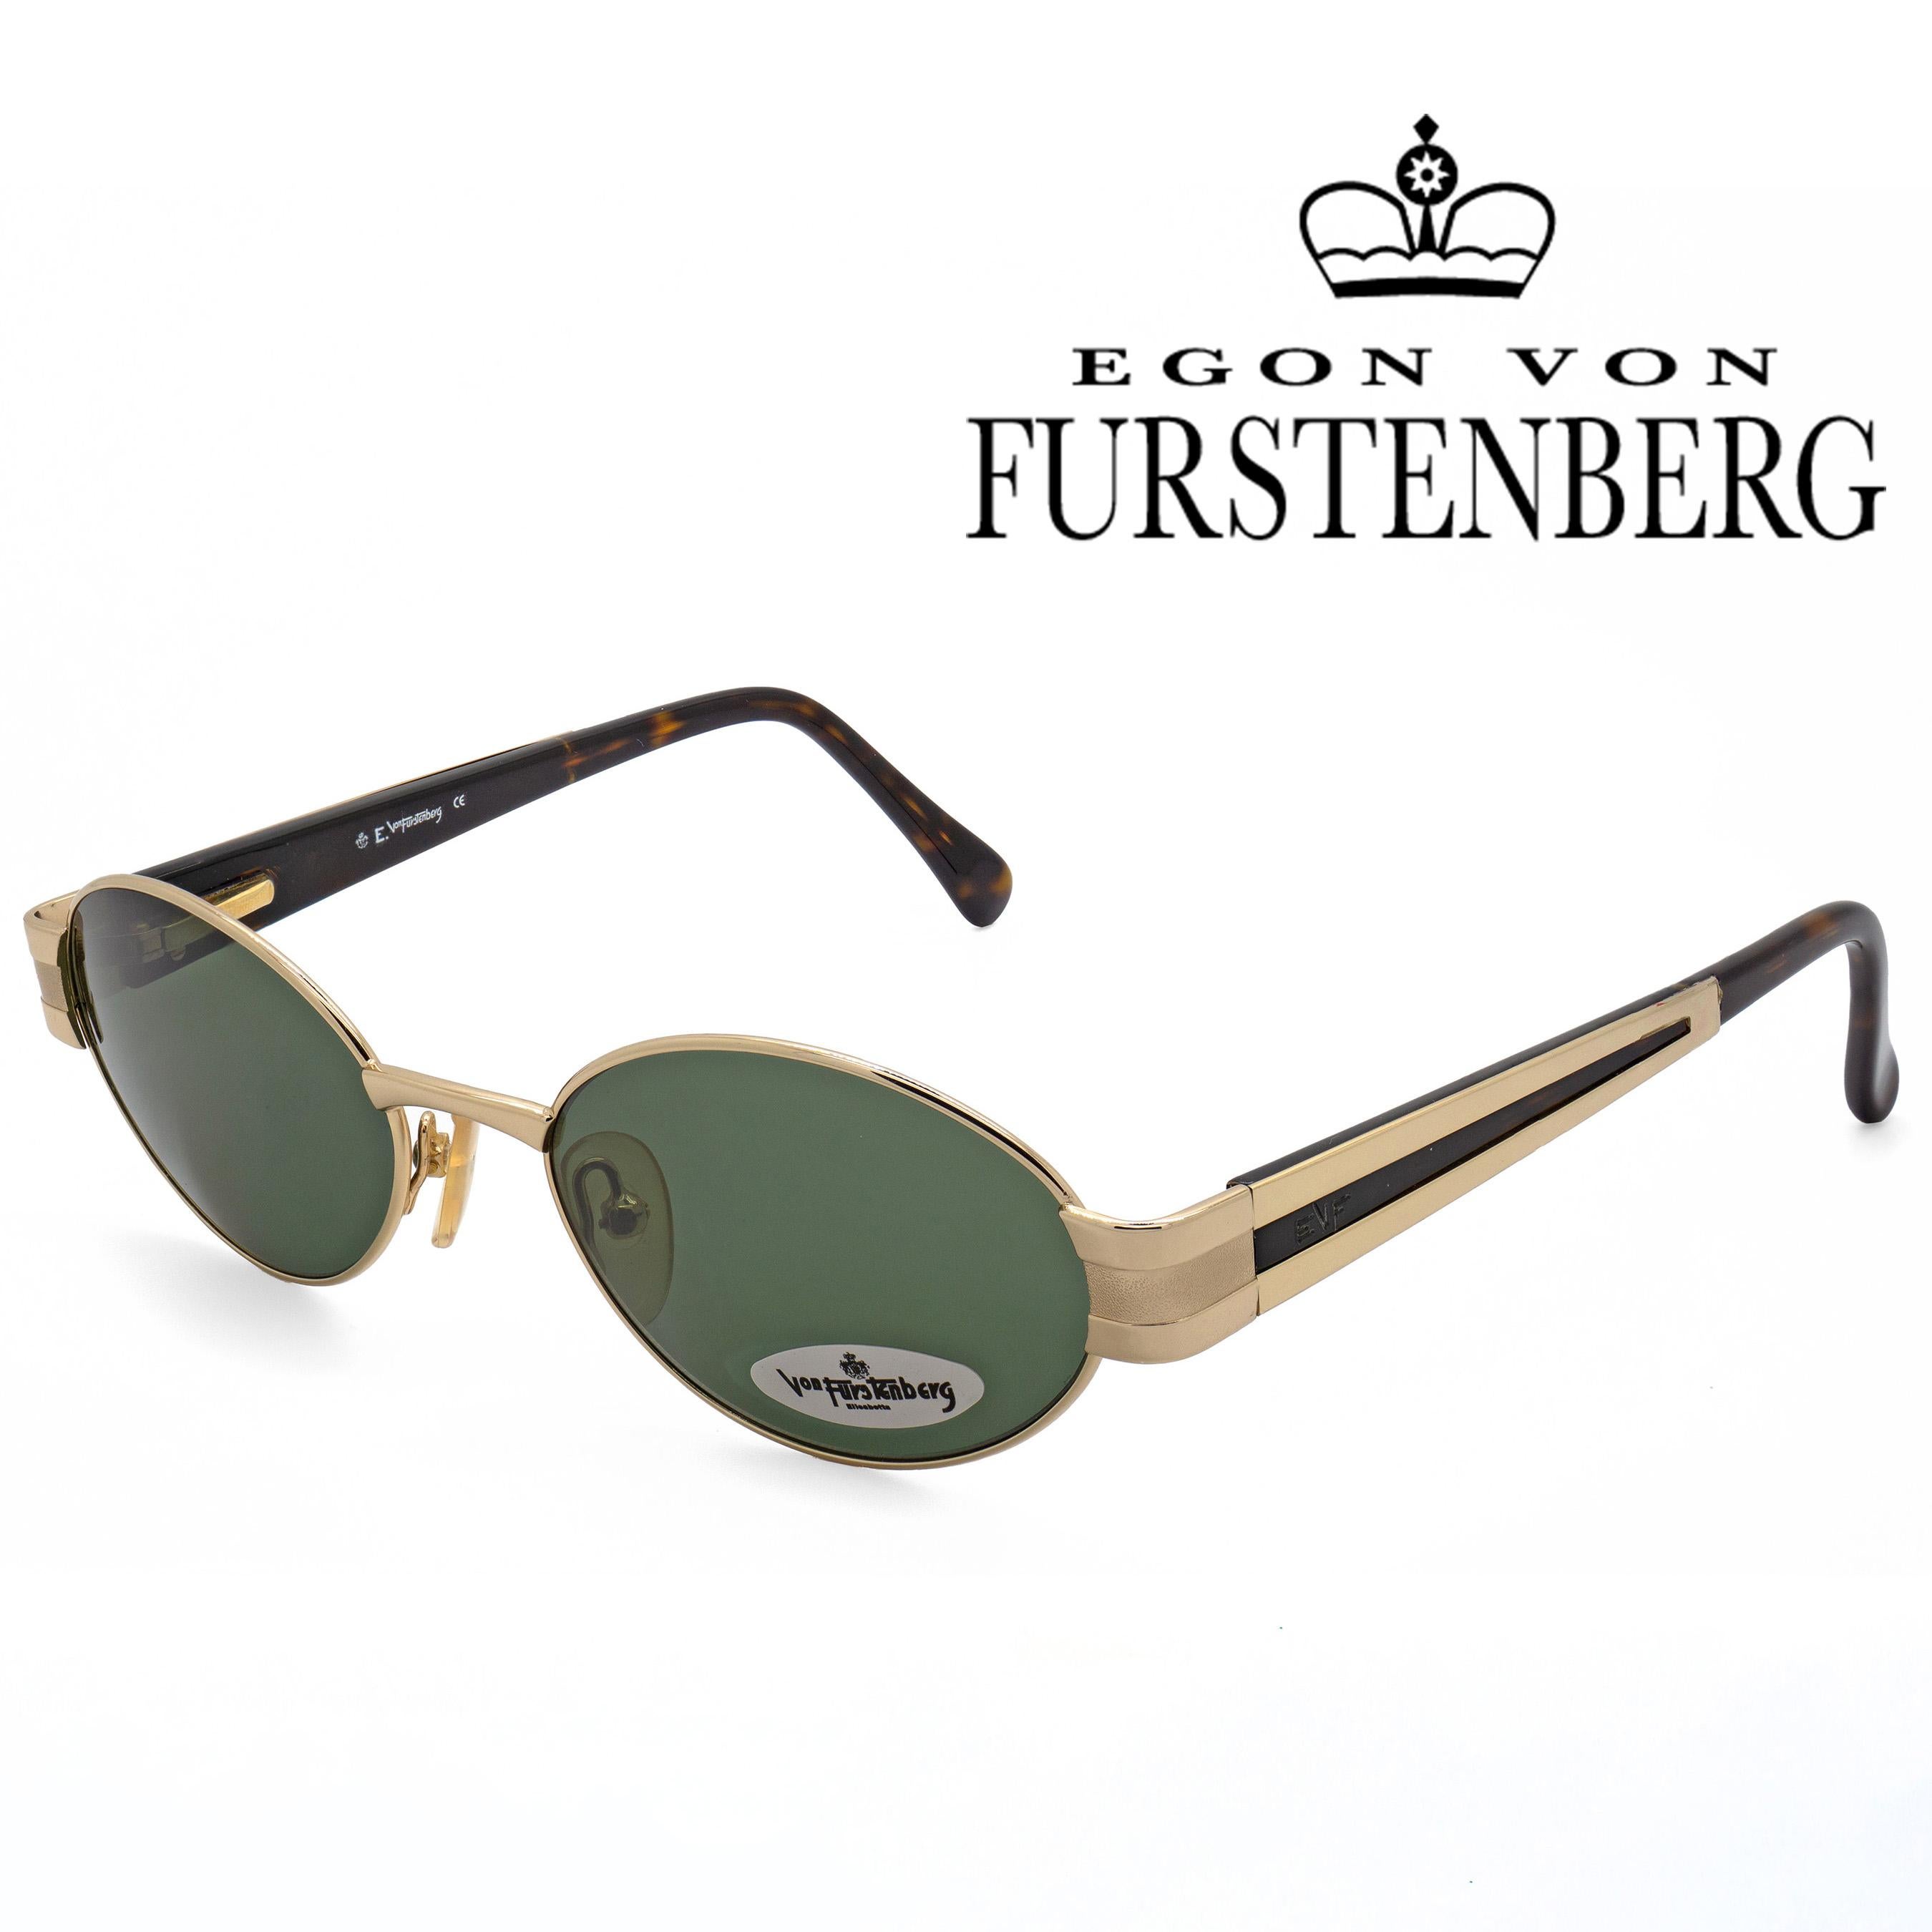 Women's or Men's Egon von Furstenberg oval sunglasses spring hinges, made in Italy For Sale